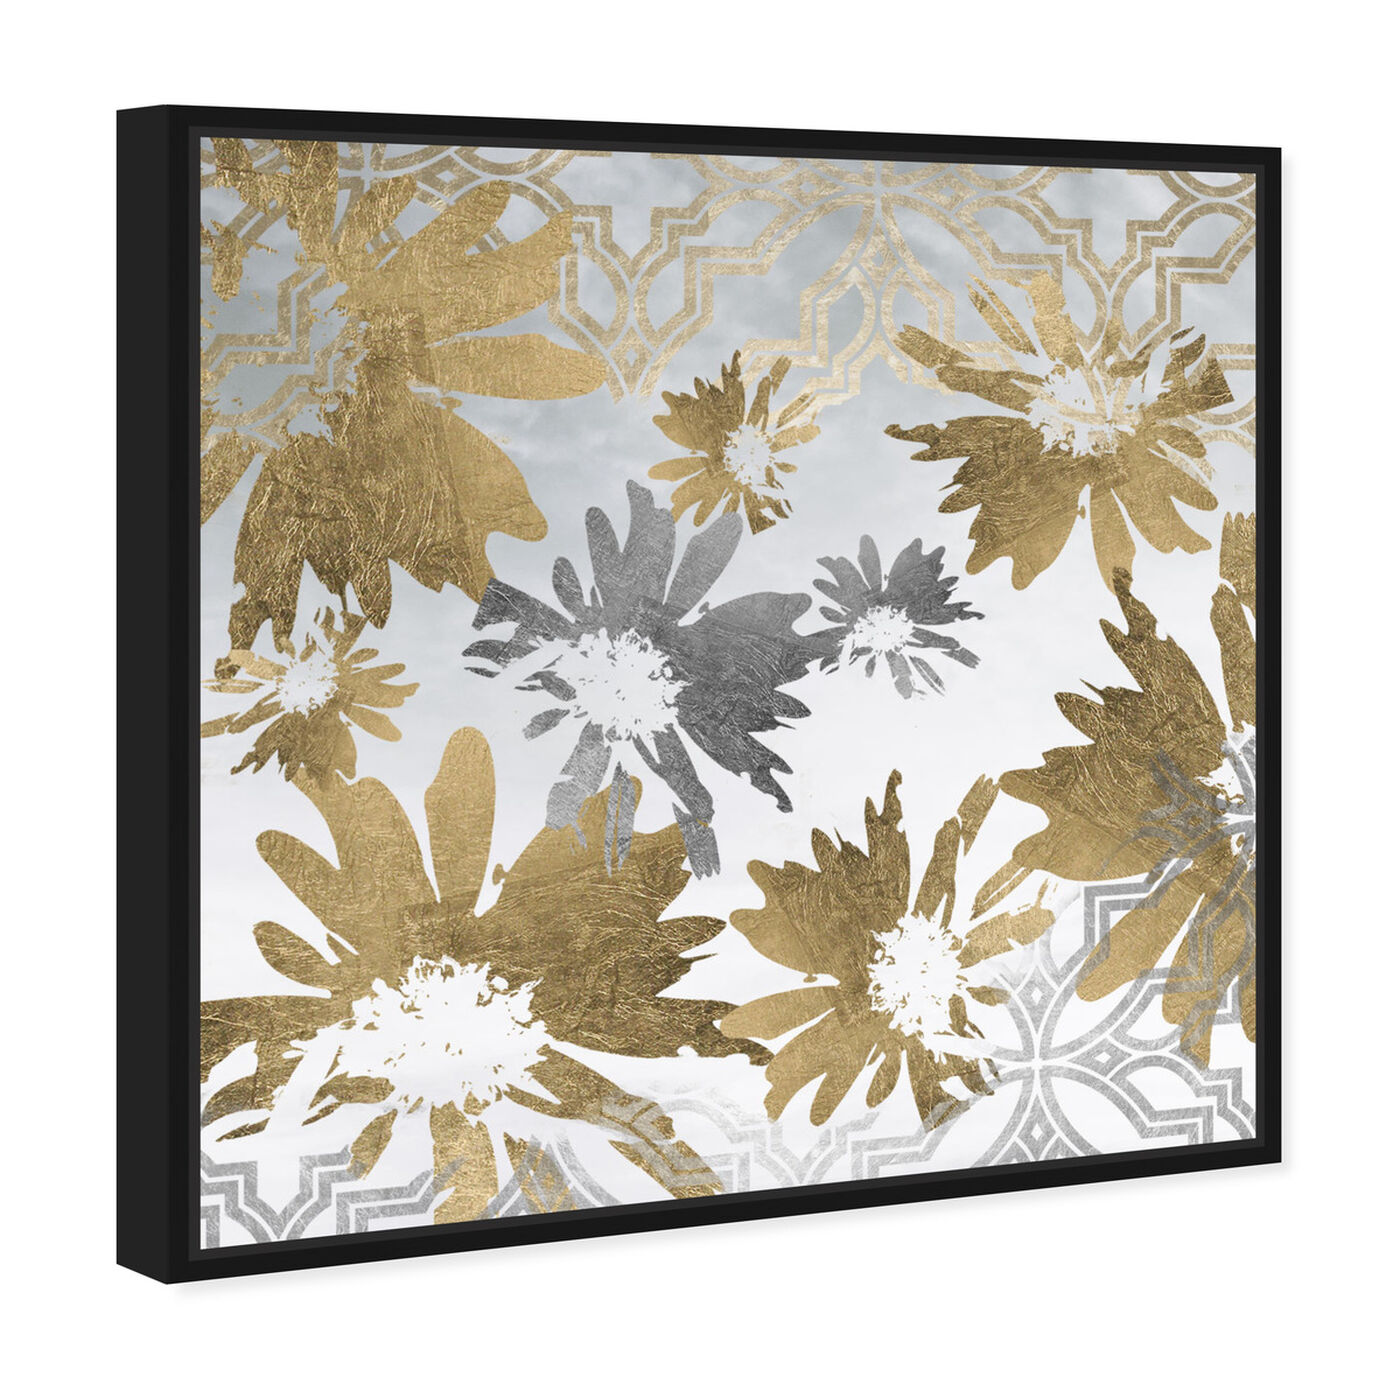 Angled view of Golden Garden featuring abstract and flowers art.